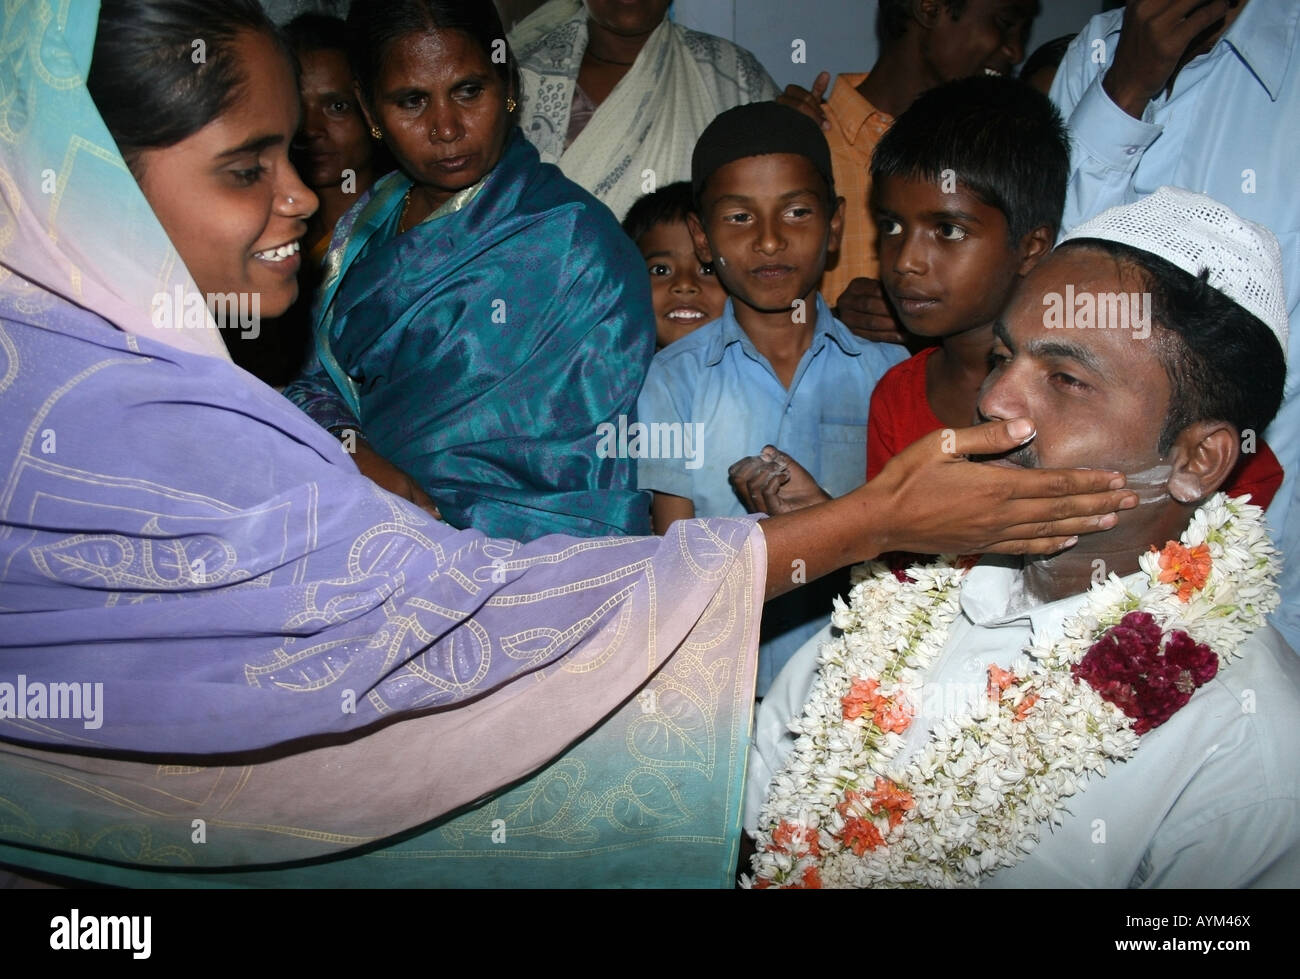 Woman Blesses Groom In The Muslim Grooms Night Before Marriage In A Stock Photo Alamy